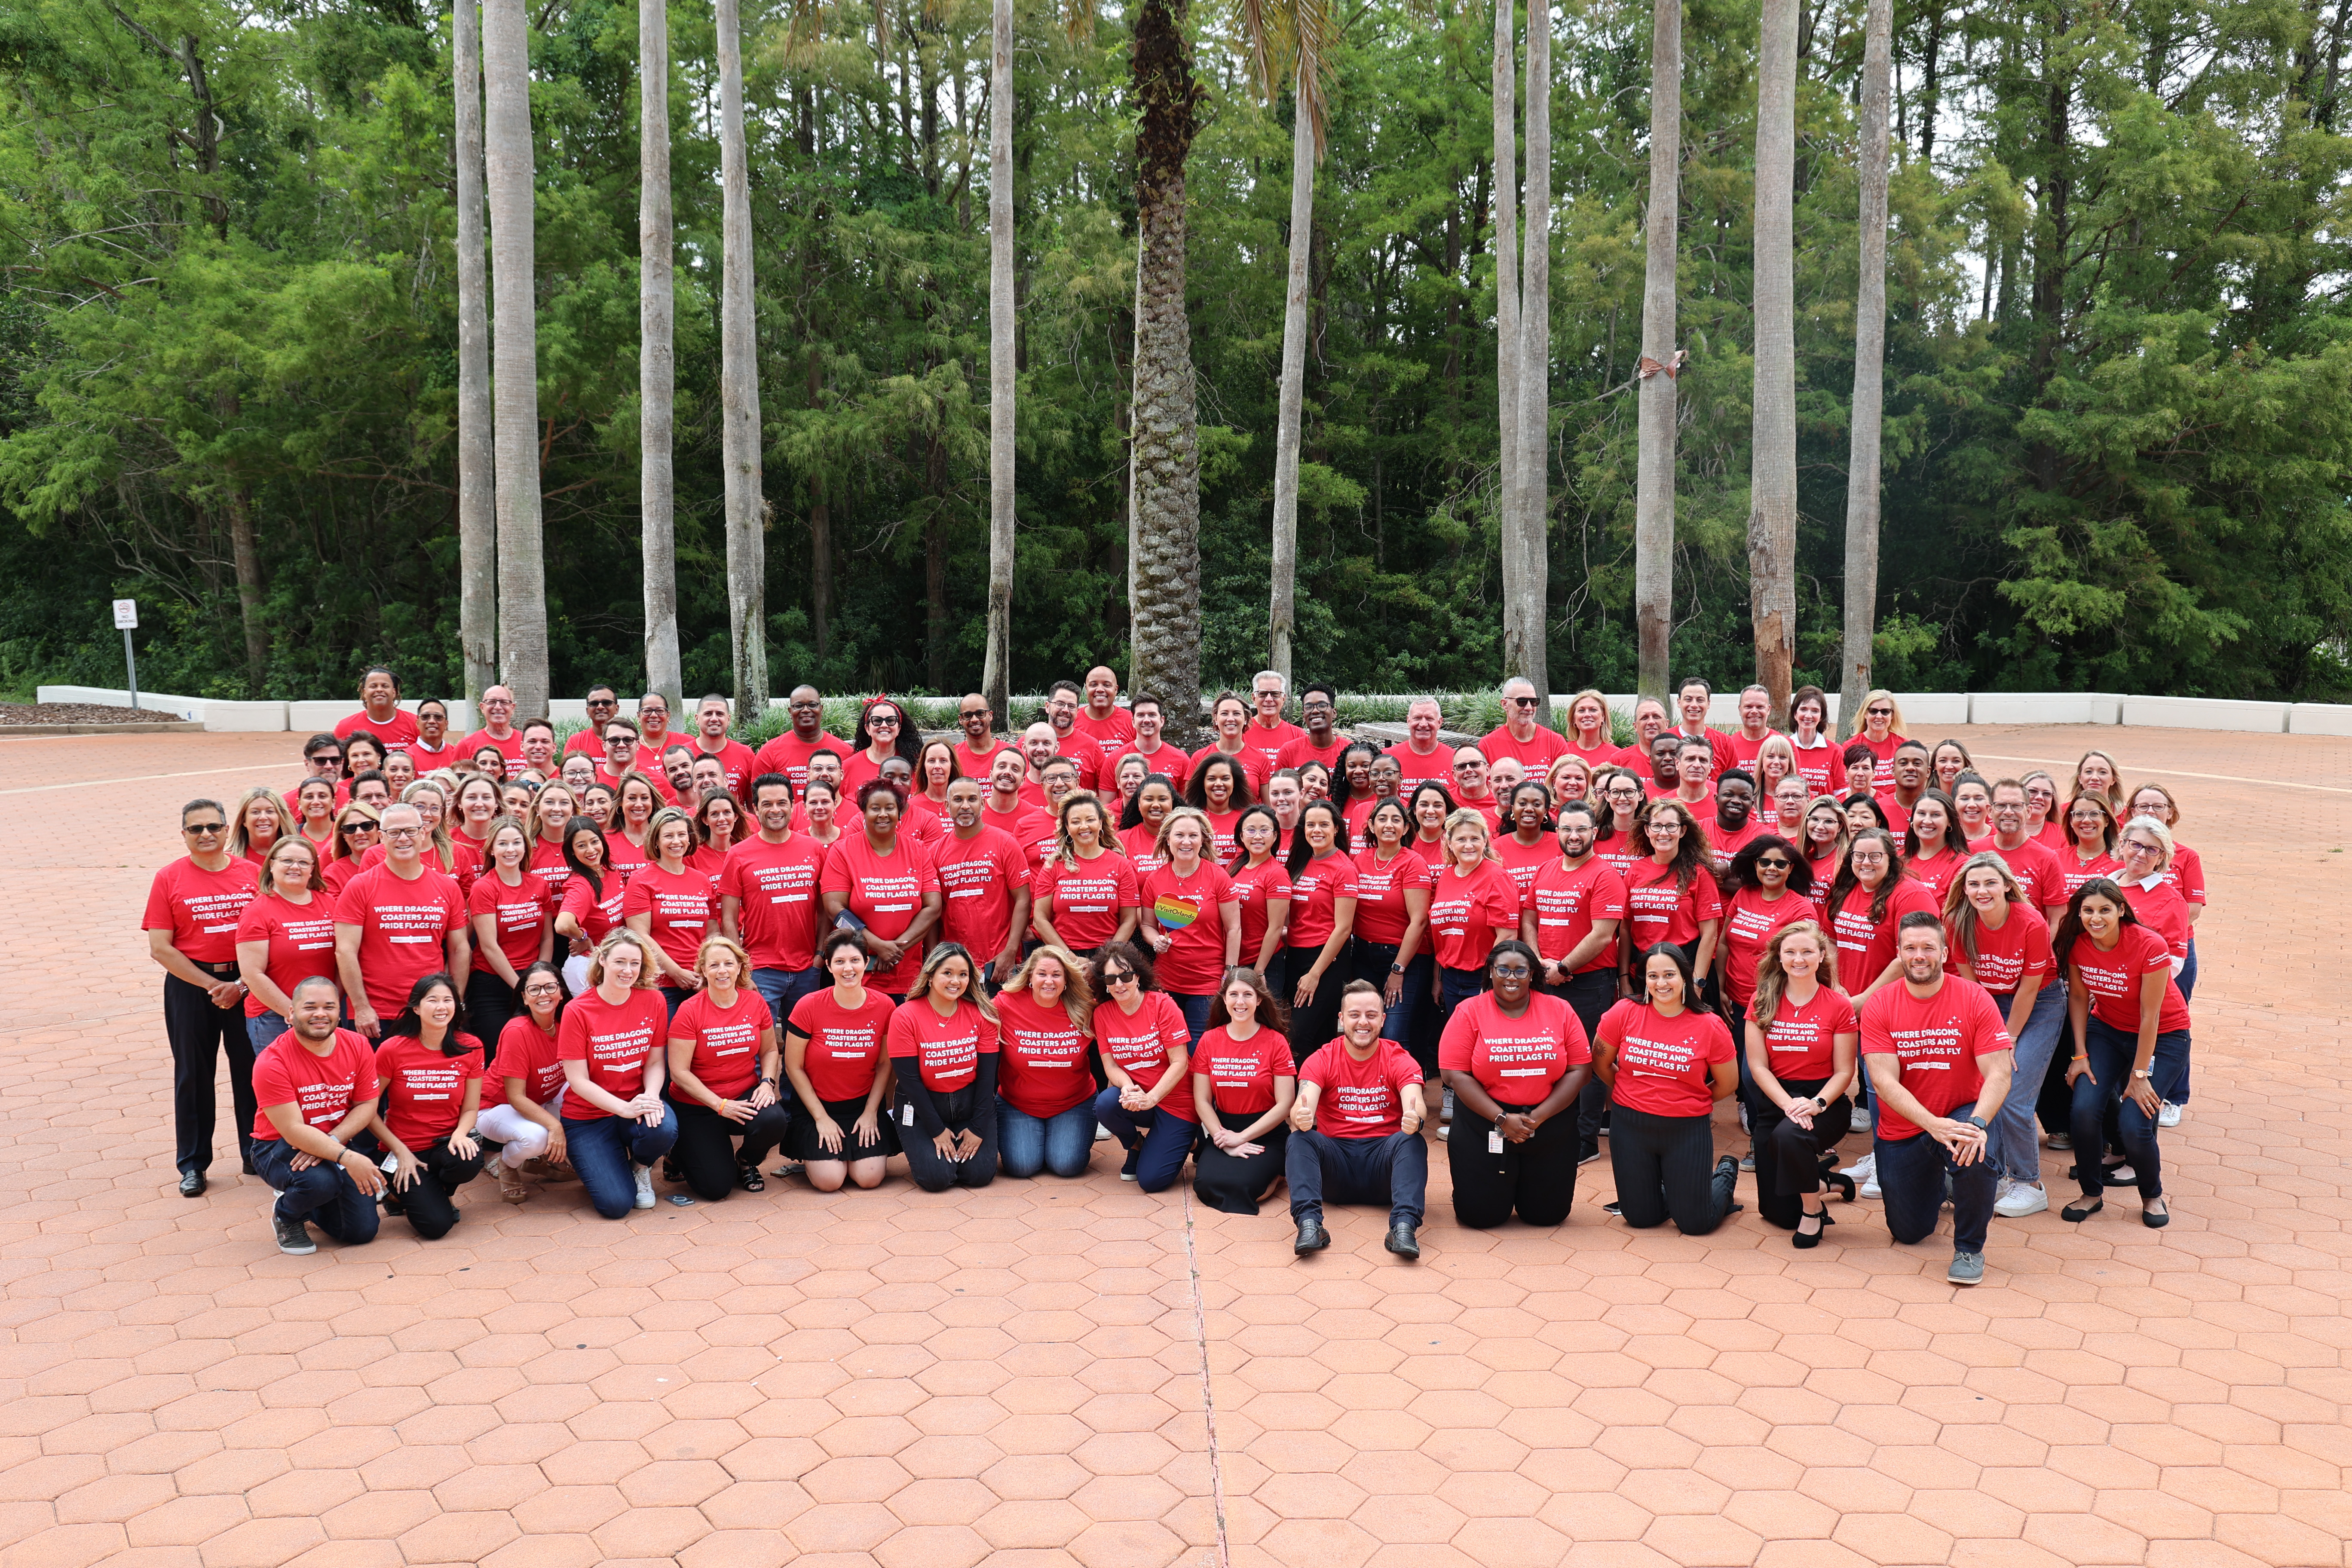 Visit Orlando's team wears red shirts in honor of RED Shirt Pride Day, a global initiative supporting diversity, equality and inclusion, safe expression and kindness. 